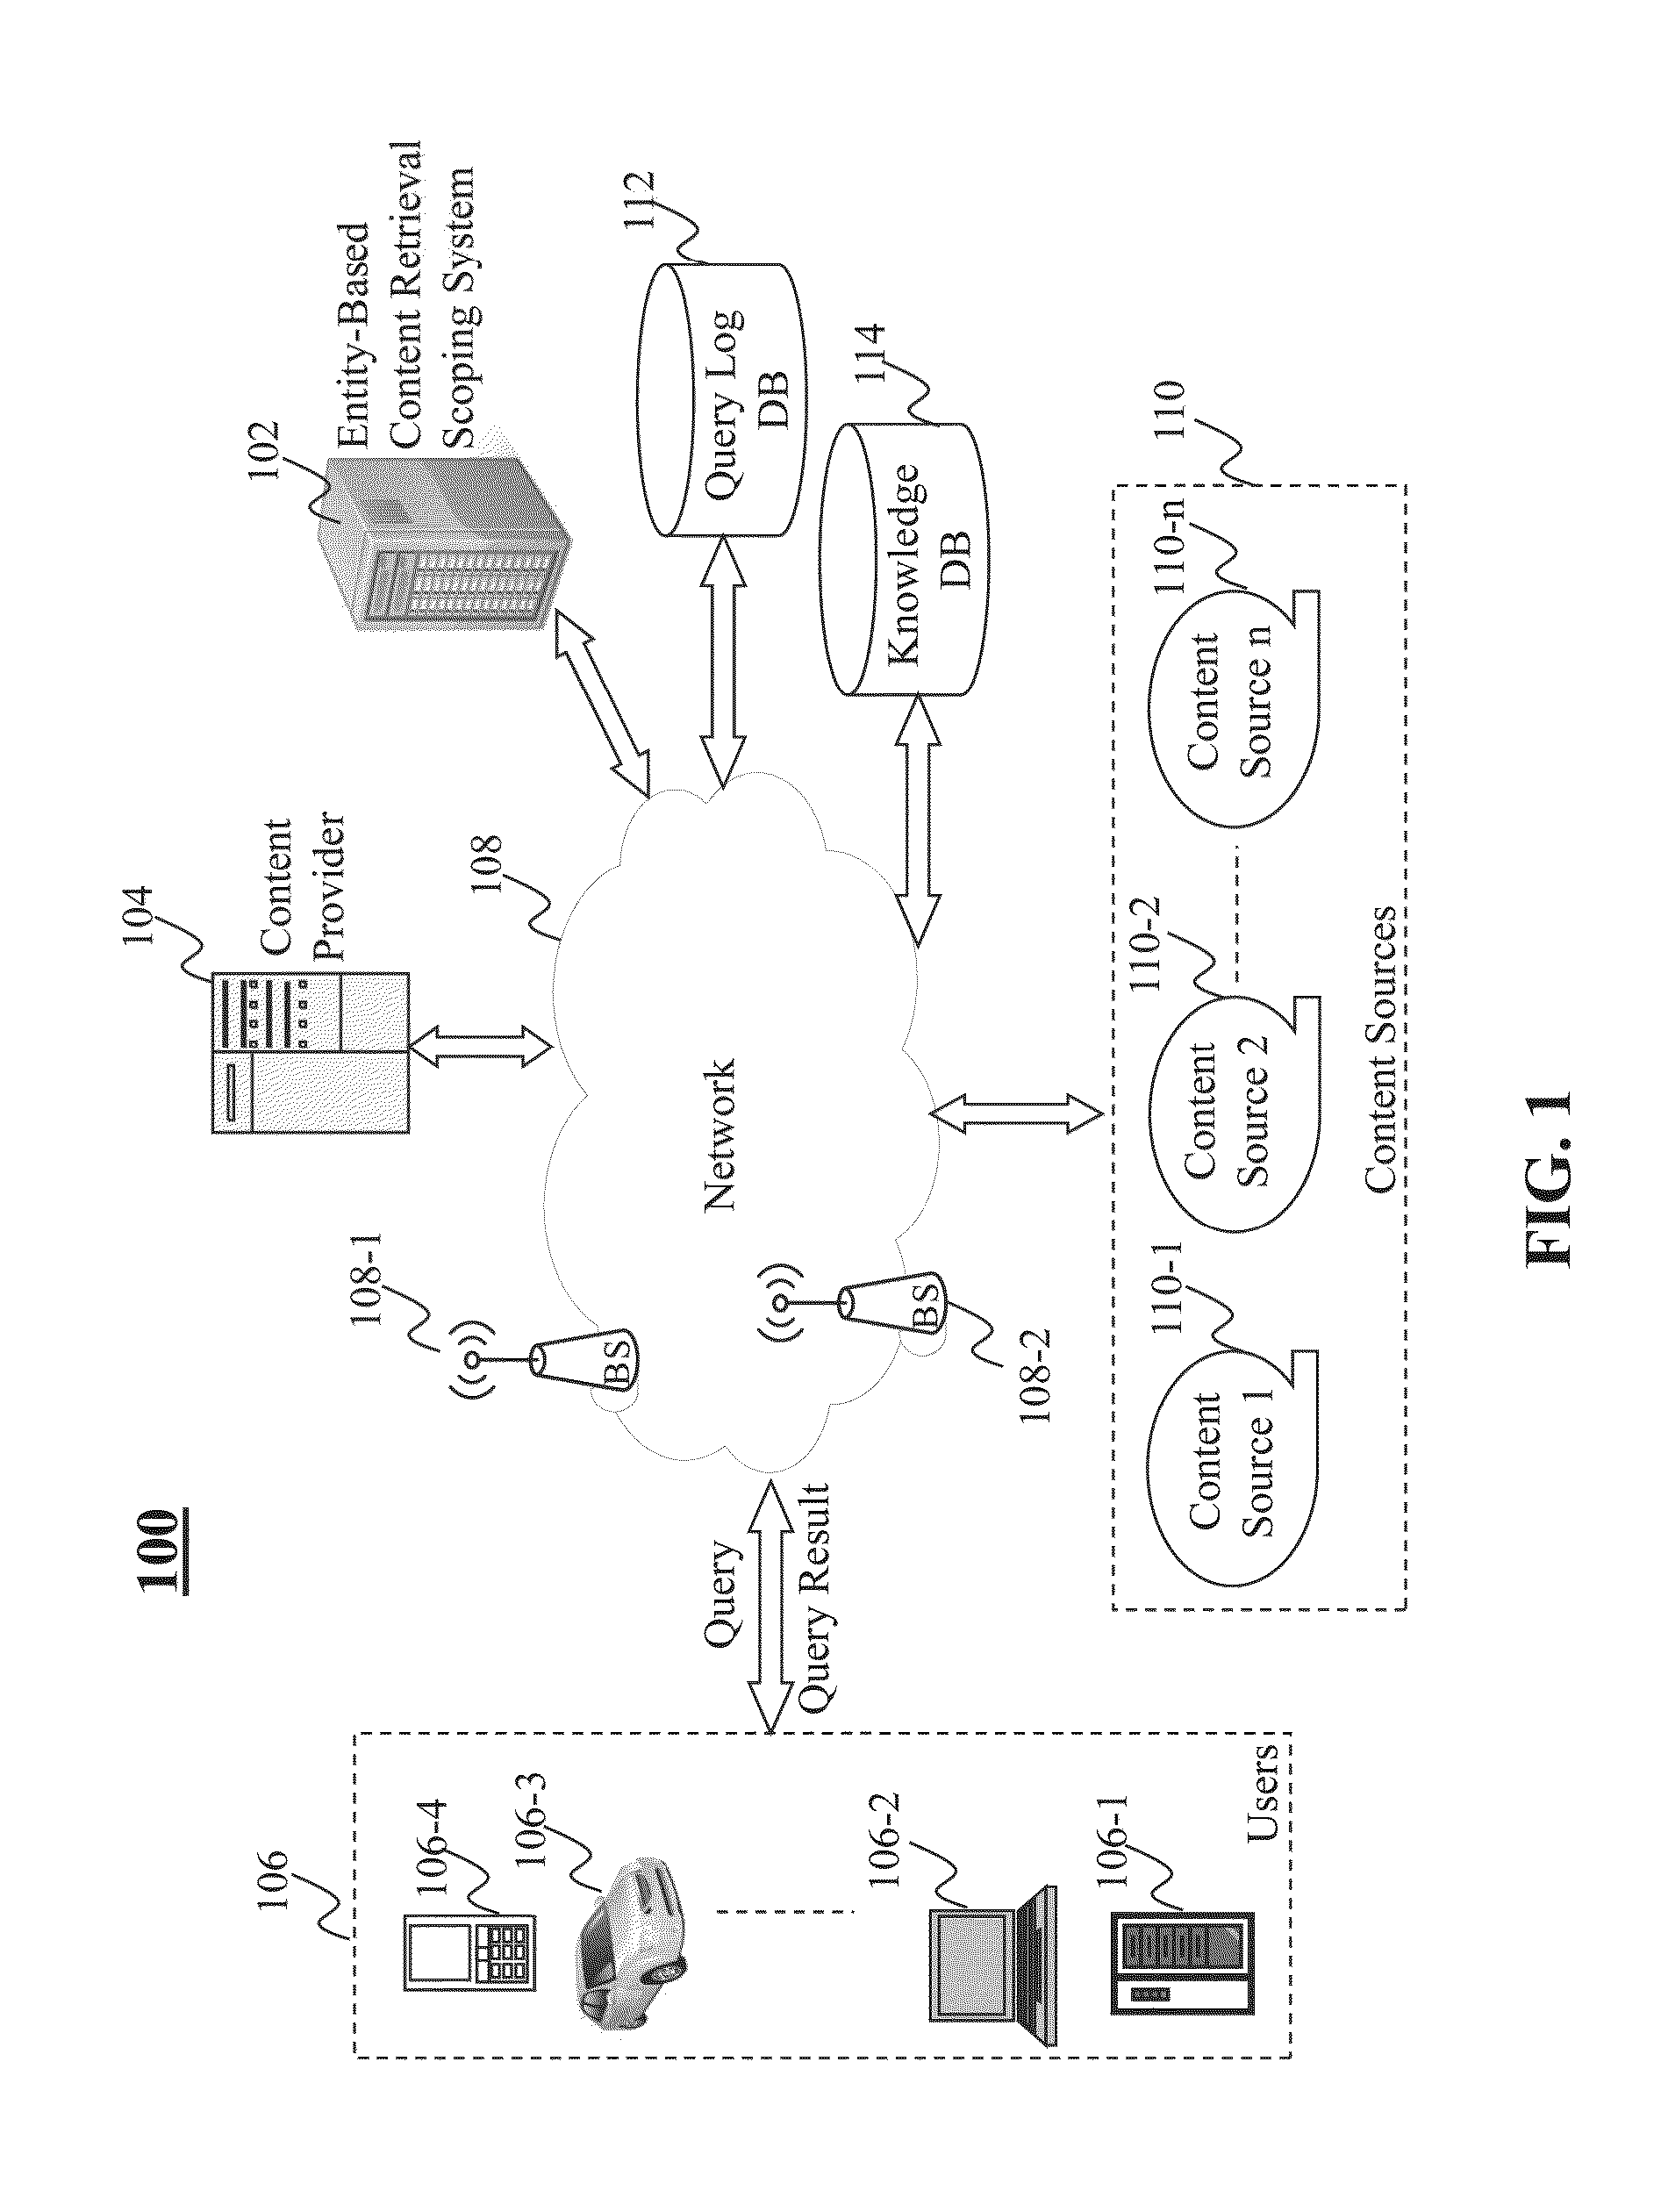 Method and System for Entity Linking